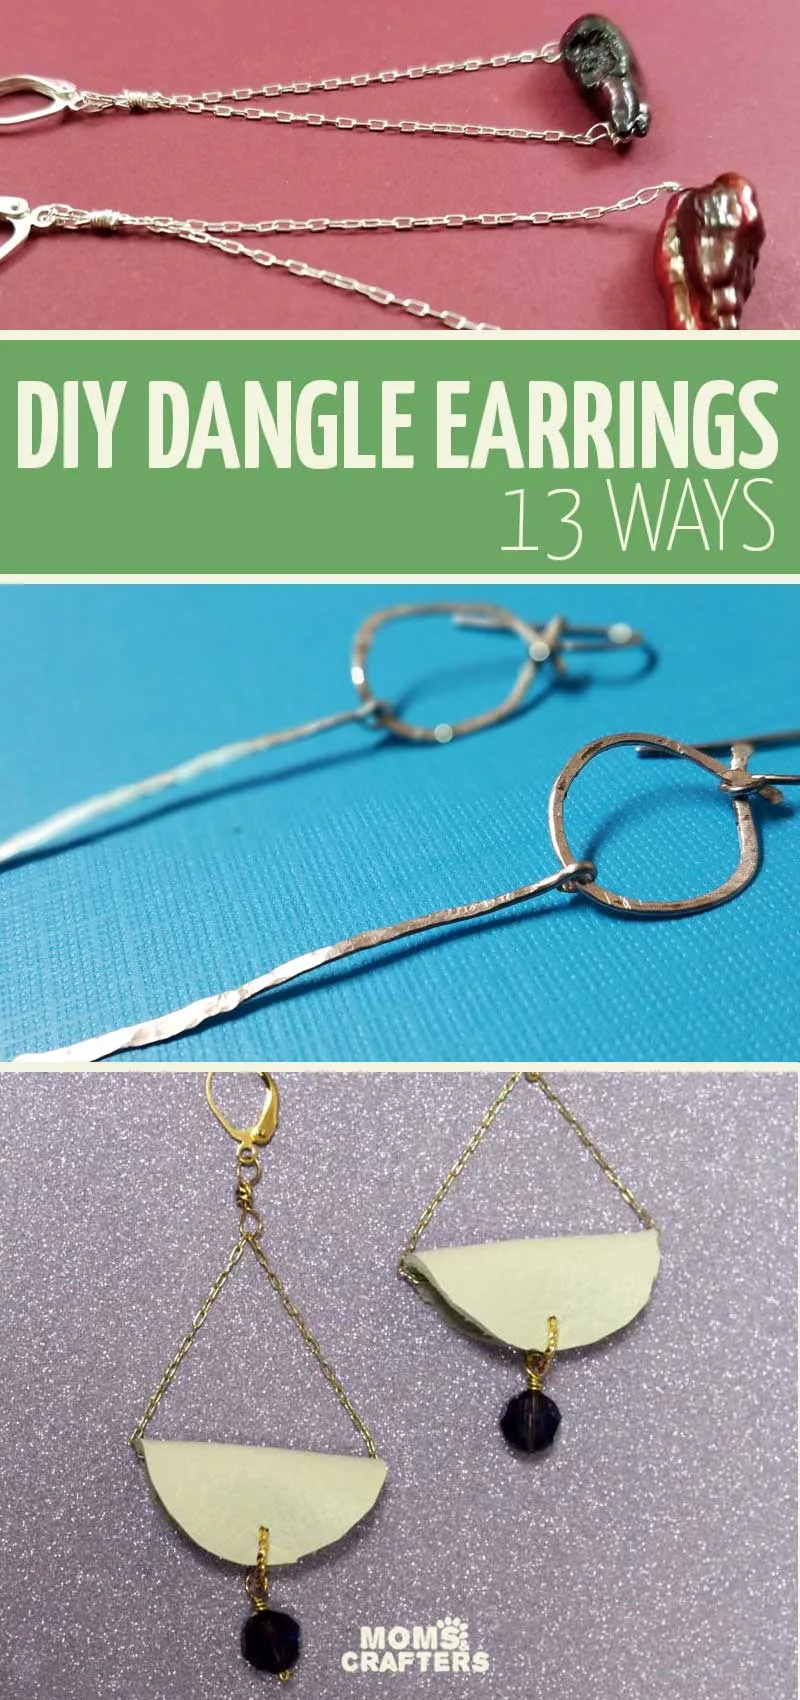 Click for loads of easy cheap jewelry making projects and ideas to make DIY dangle earrings!